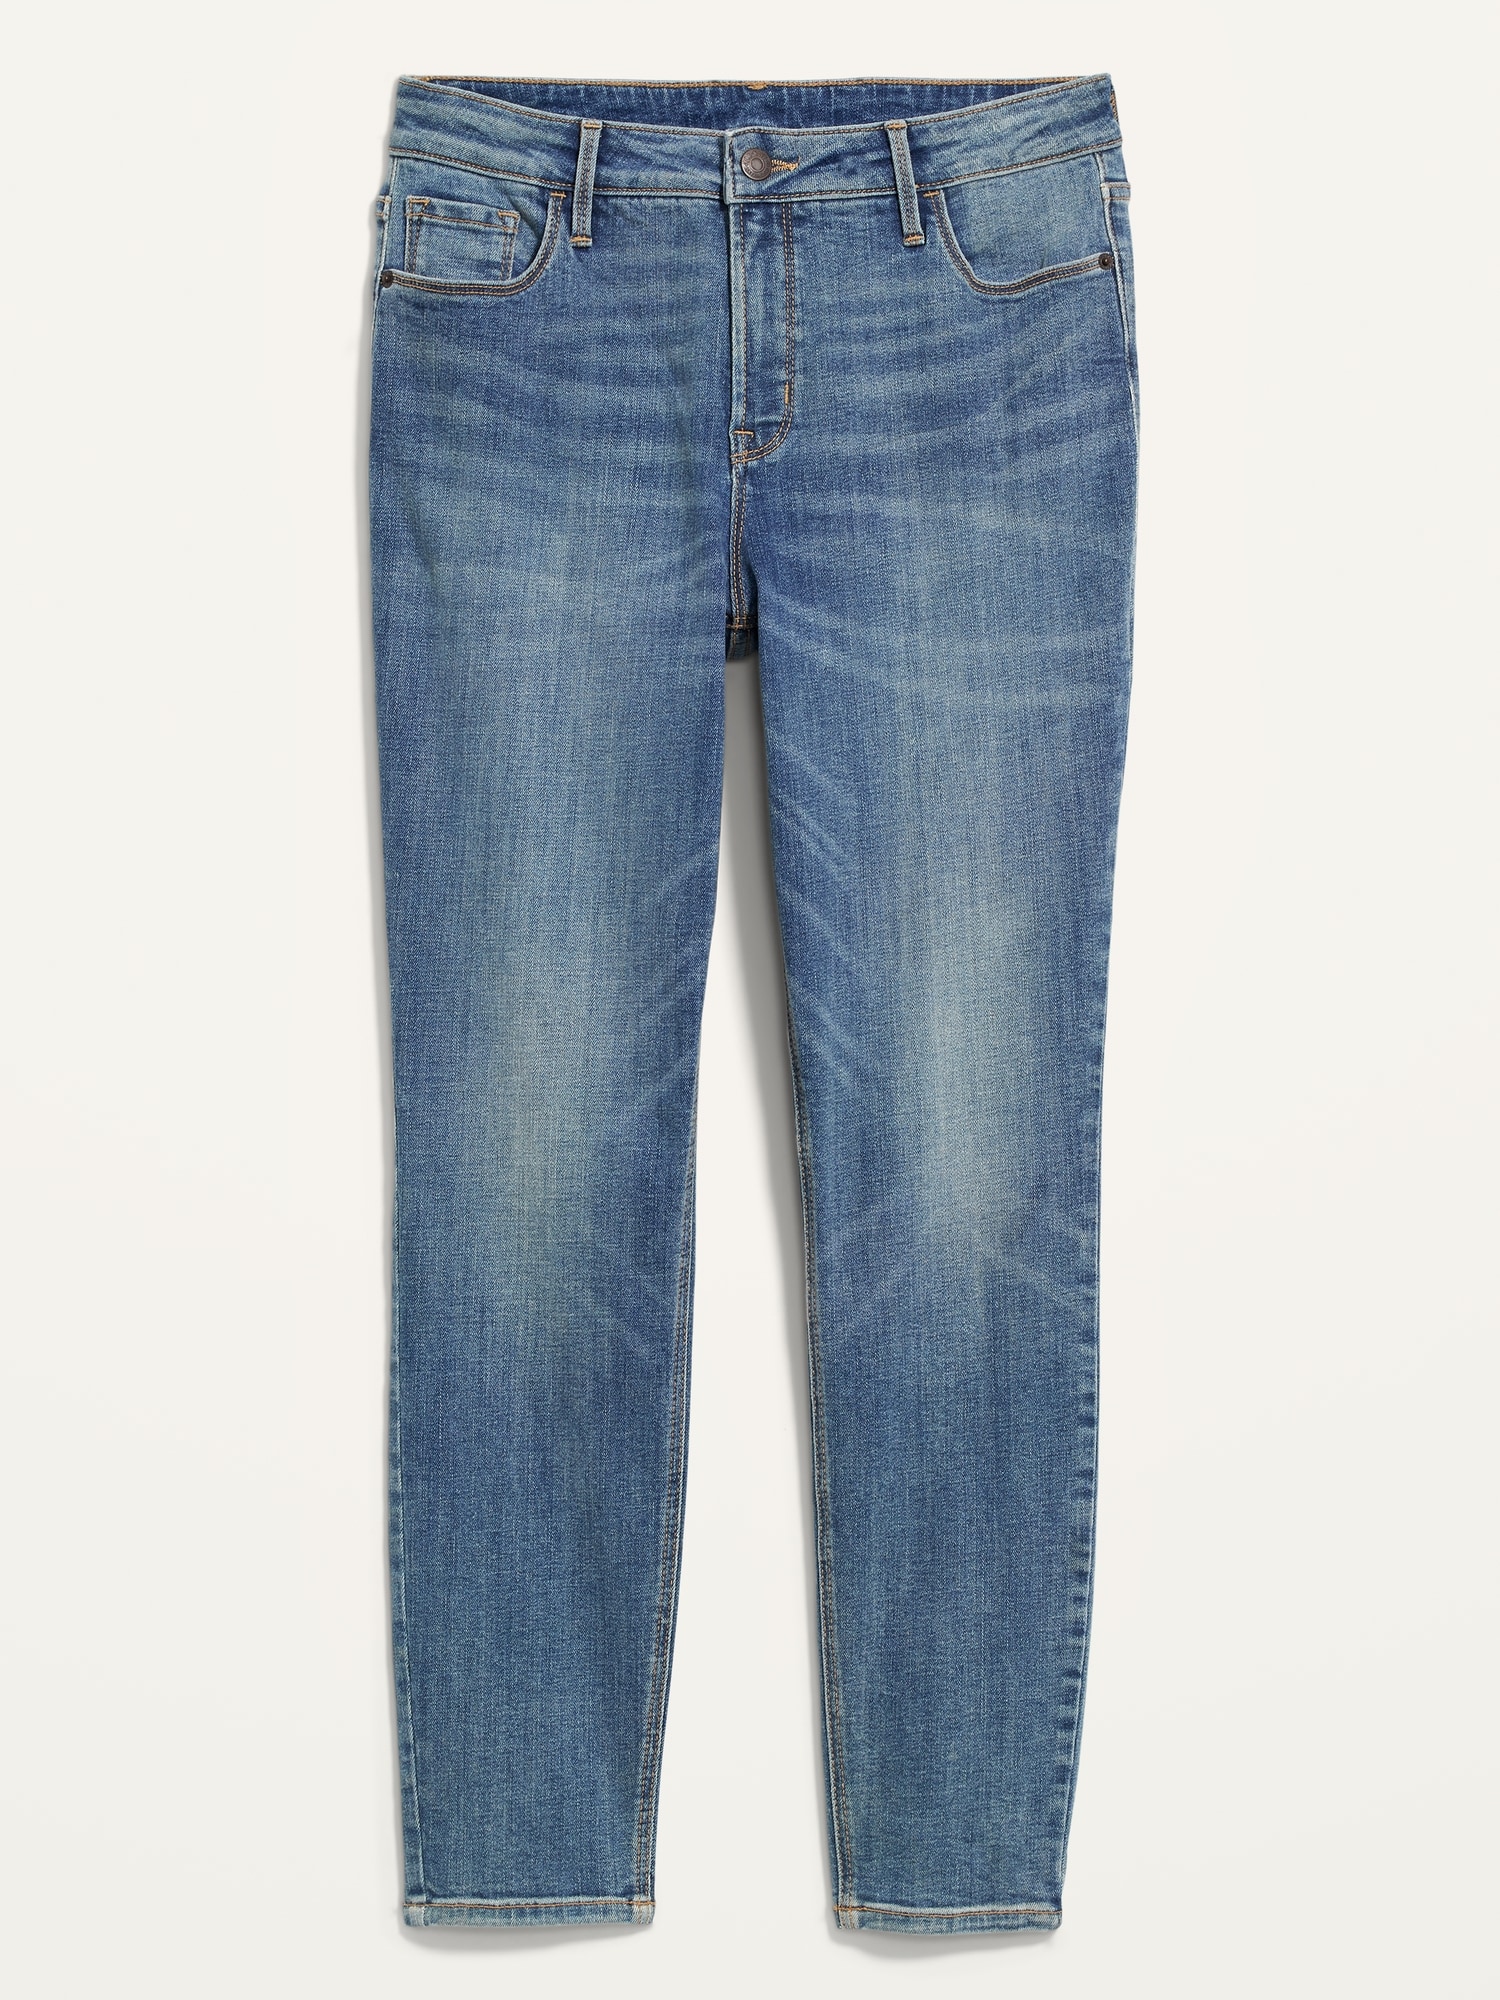 Old Navy High-Waisted Rockstar Super Skinny Ankle Jeans For Women blue. 1